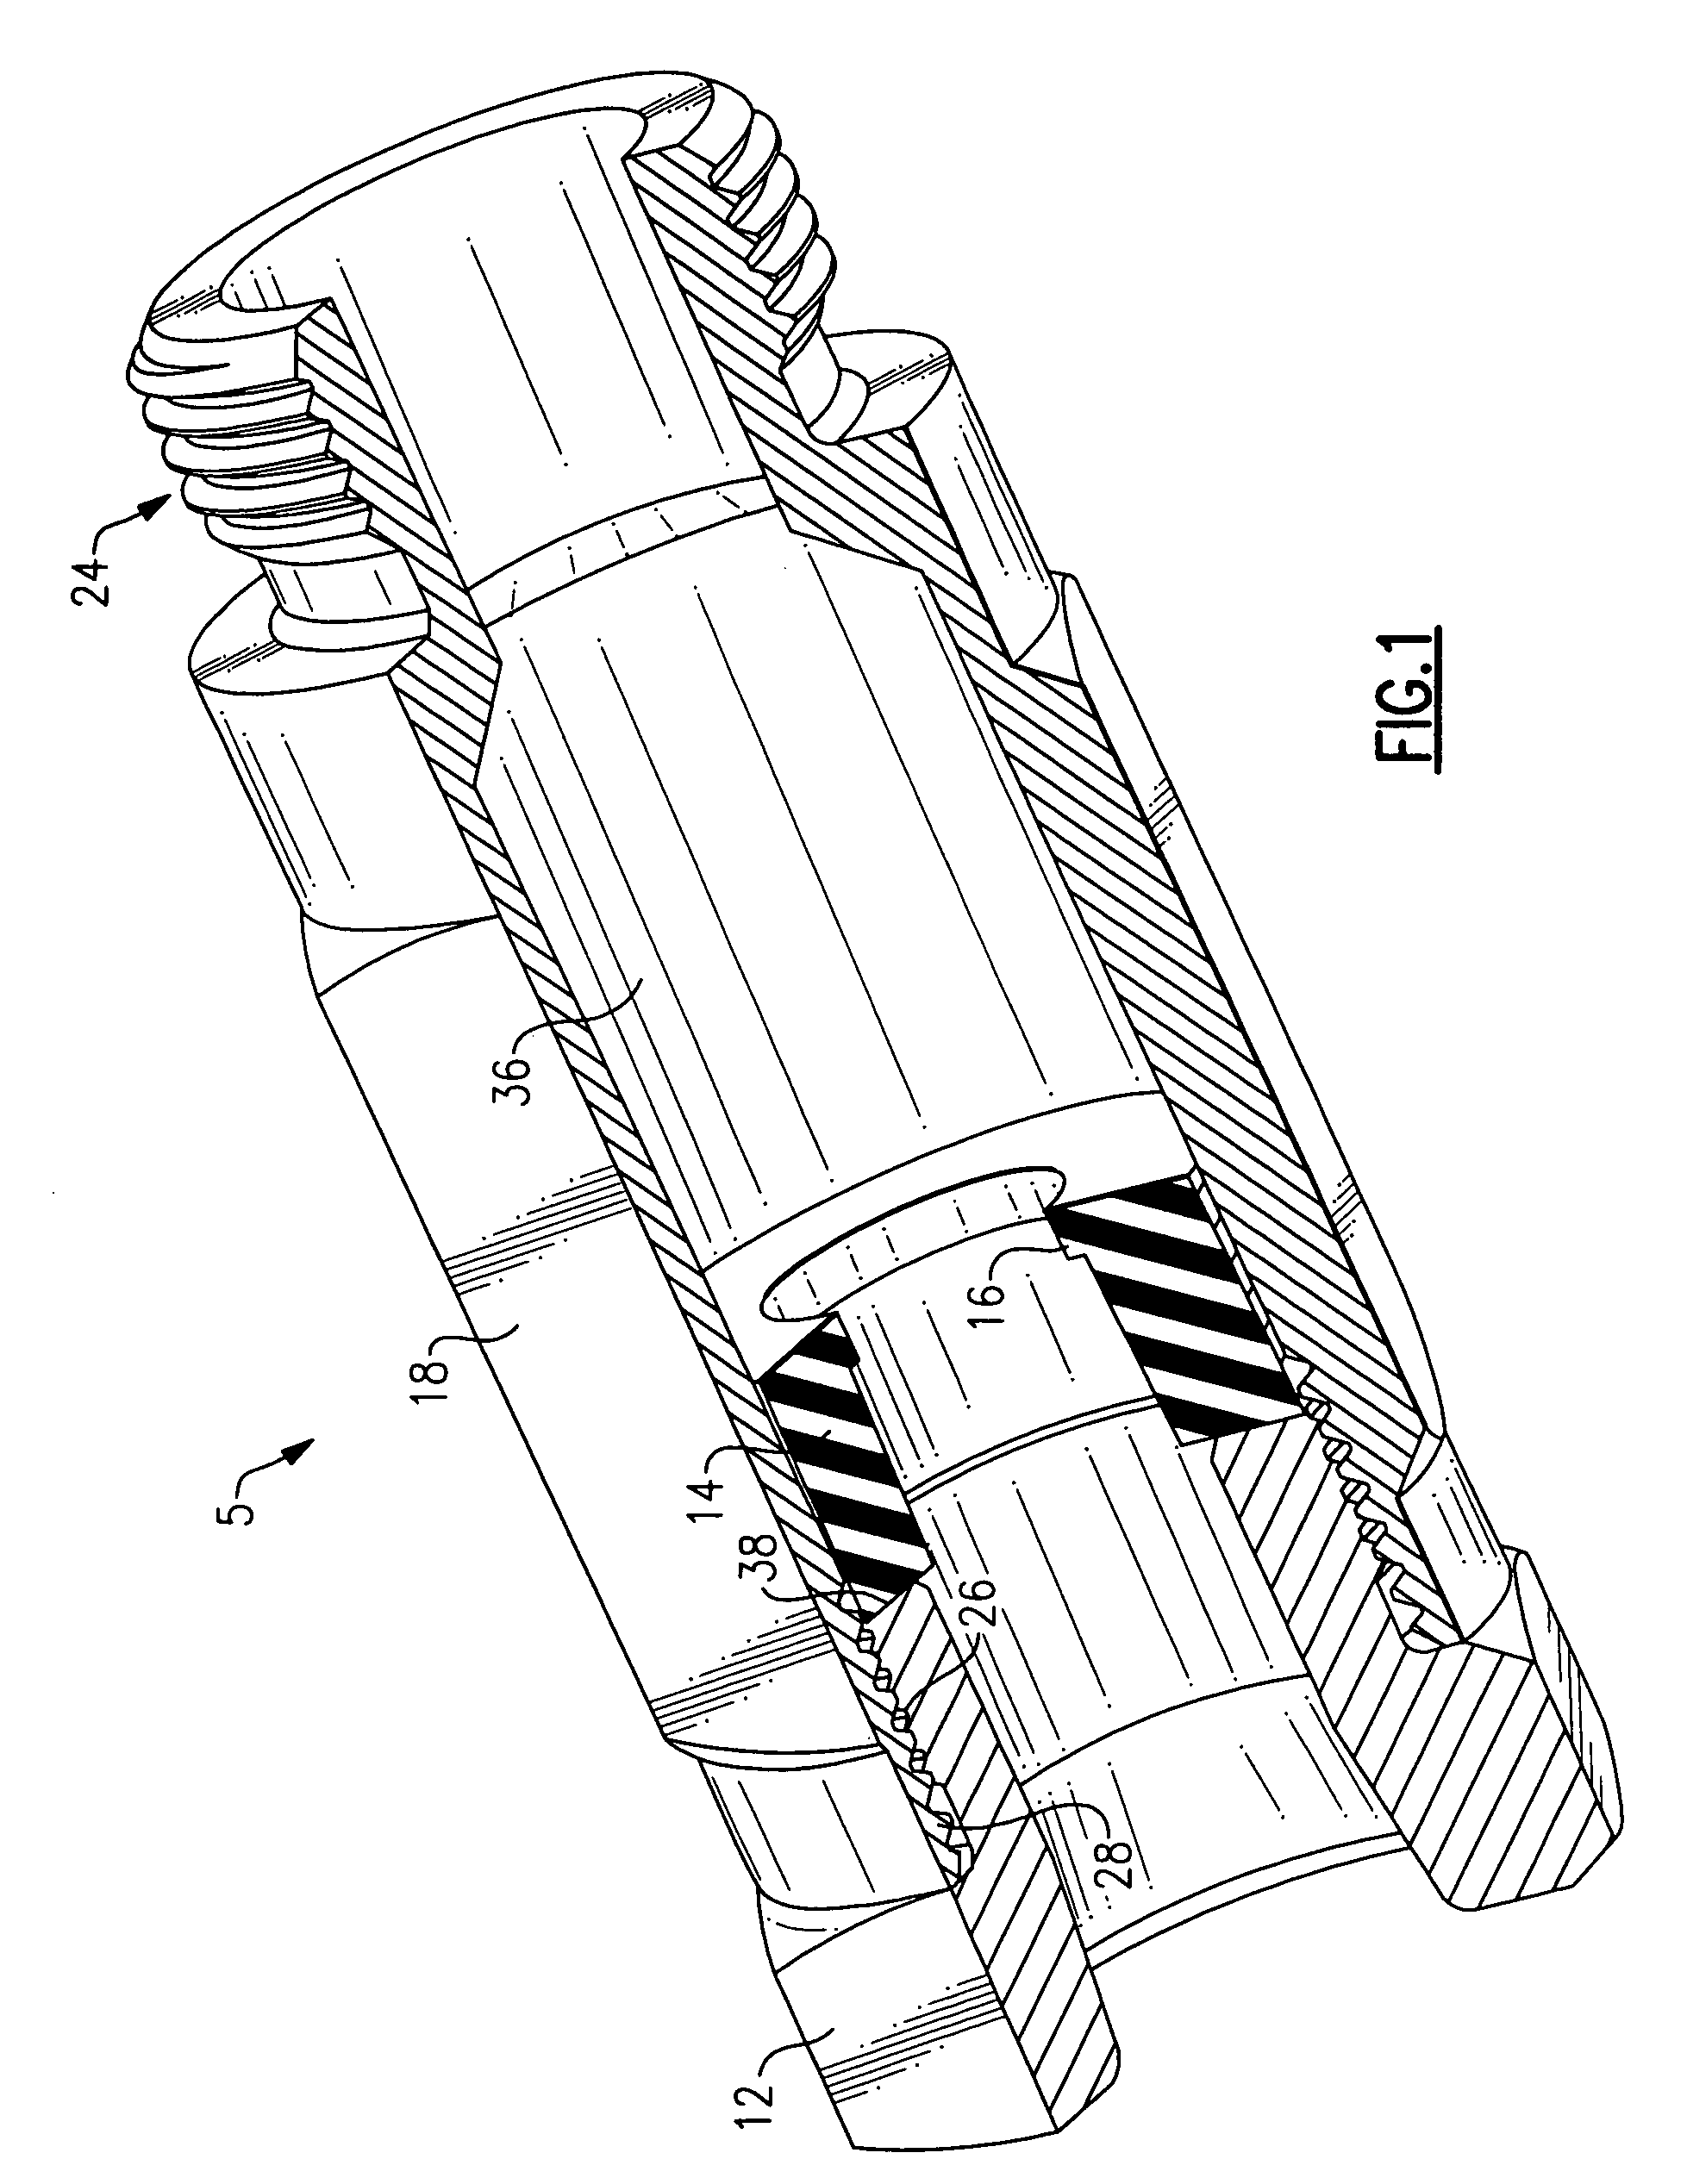 Epoxy bonded fiber optic connector and method of constructing same